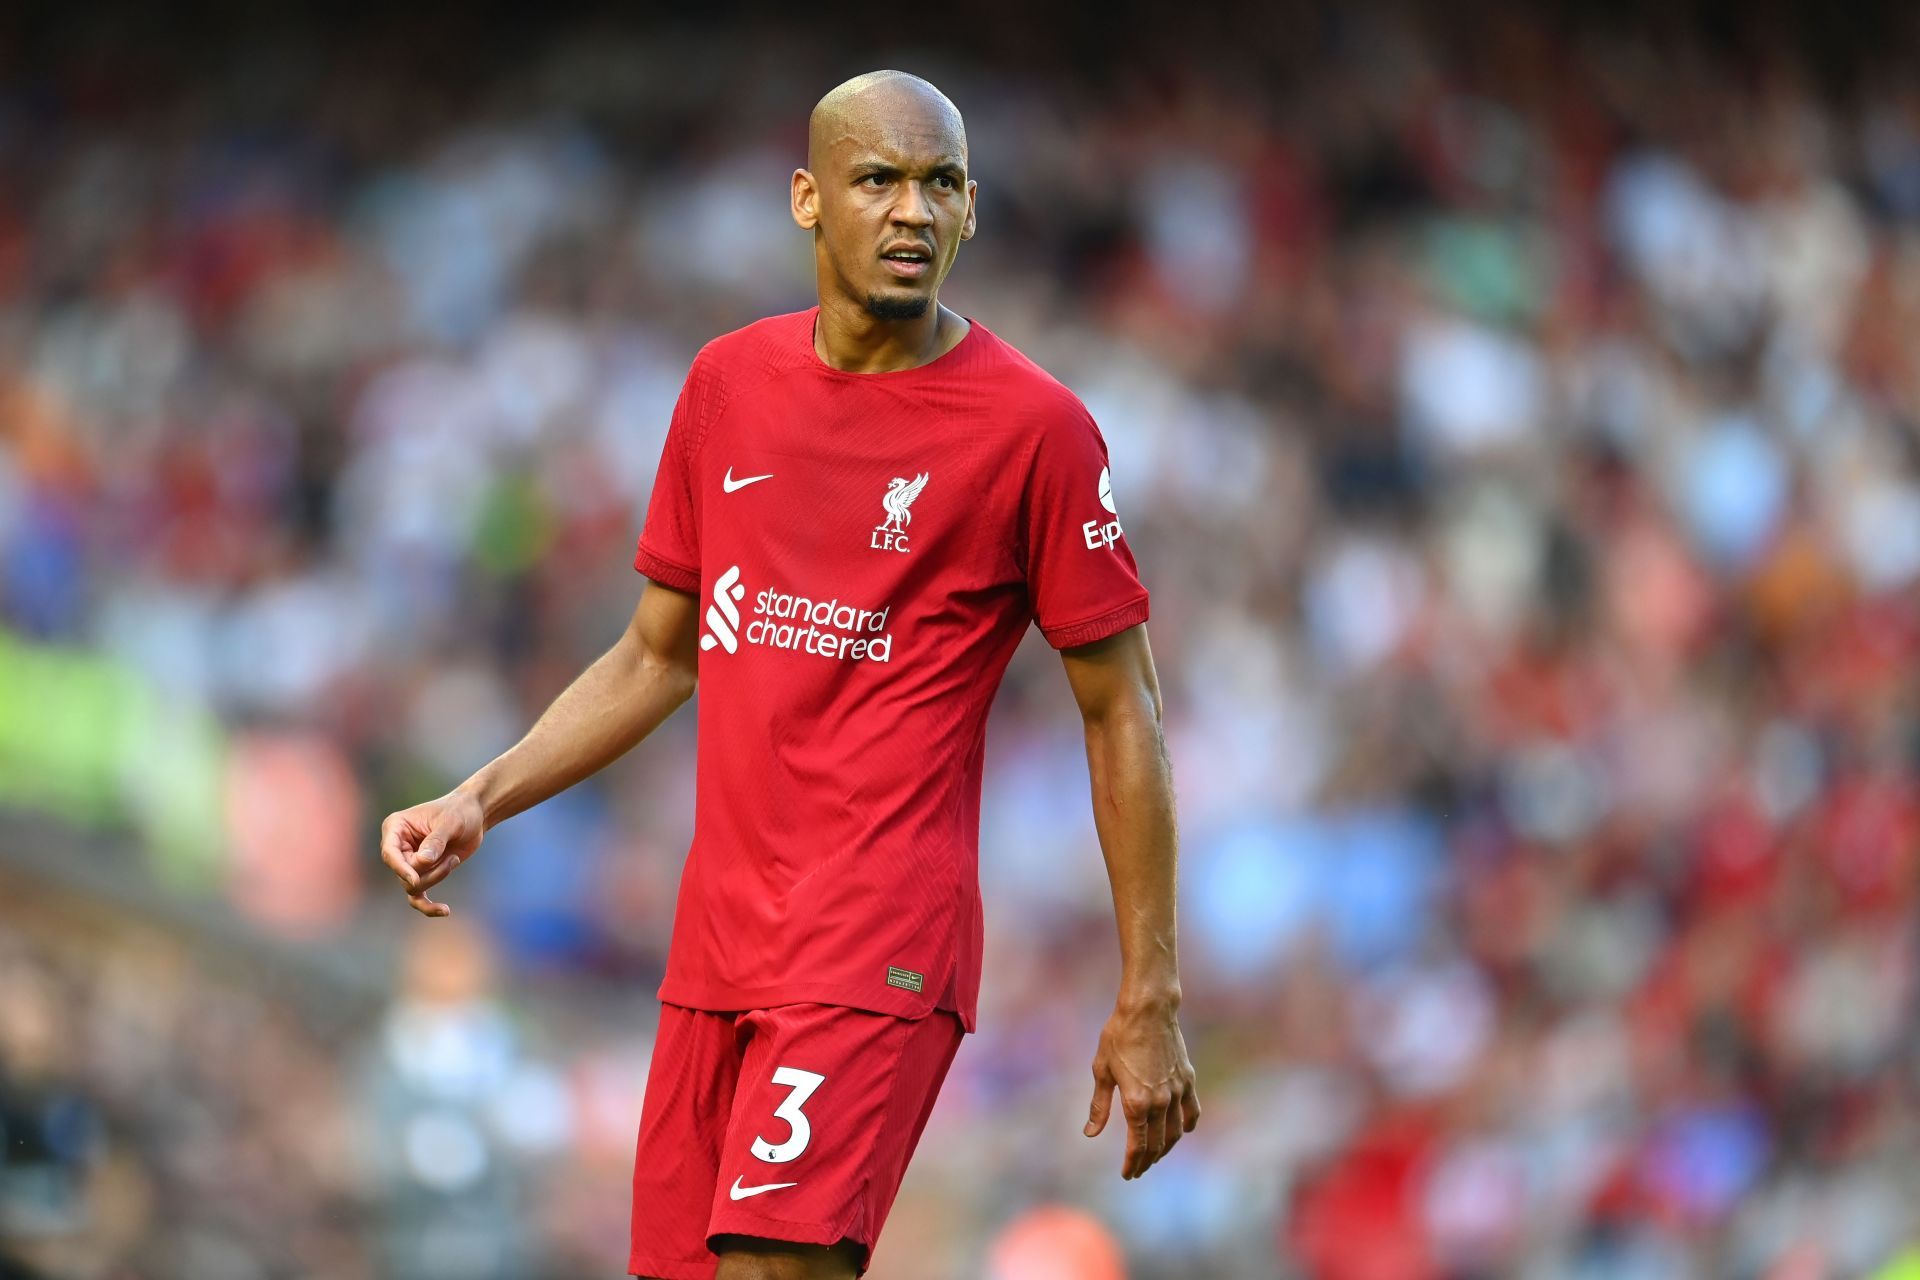 Agbonlahor tips Fabinho to leave Anfield.